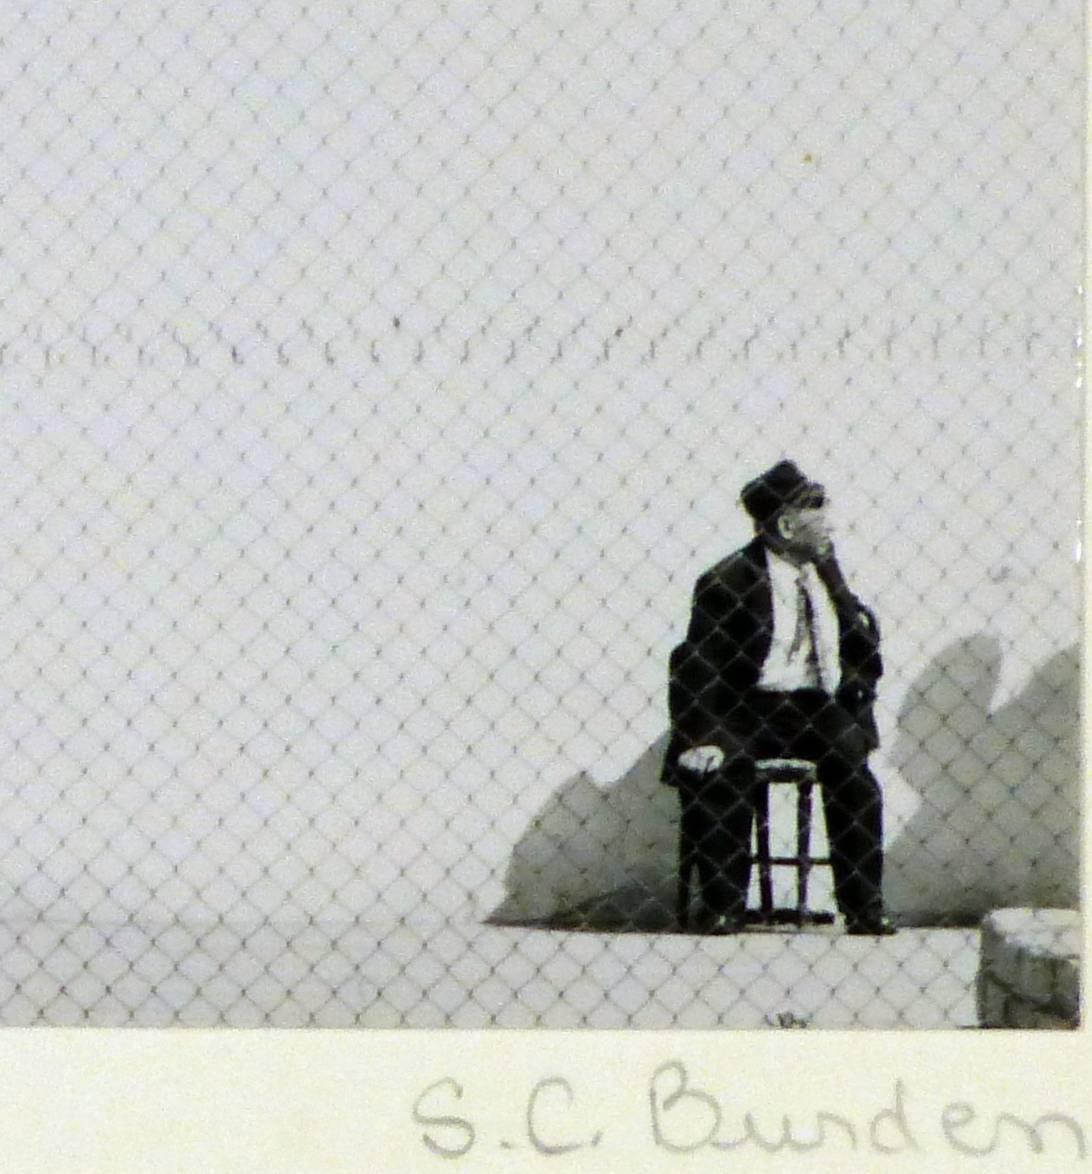 Original pencil signed silver-gelatin photograph of a man sat at a basketball court by photographer Shirley Carter Burden, 1953. Signed "S.C. Burden" lower right. 

From a personal folio of pictures dedicated to his niece Shim of the